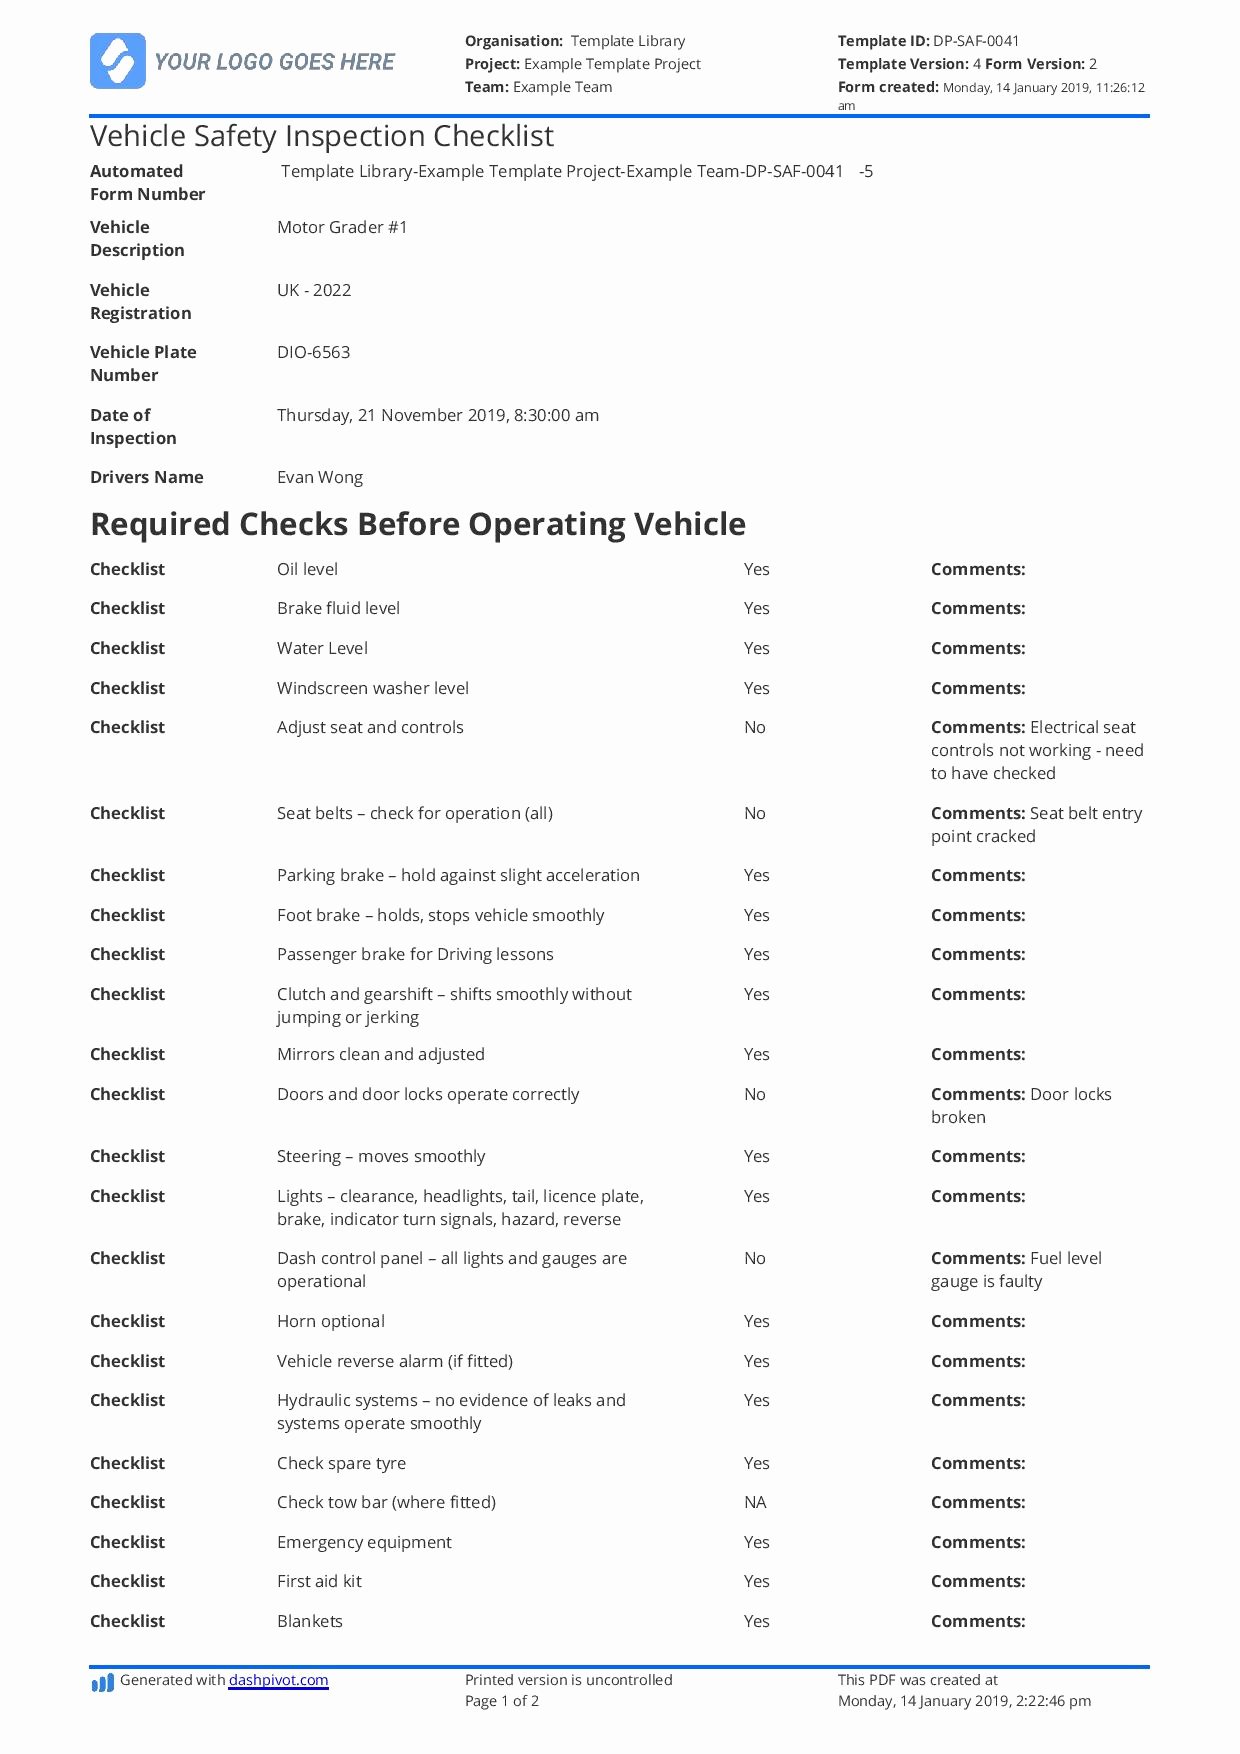 Vehicle Inspection Checklist Template Awesome Vehicle Safety Inspection Checklist Template Free and